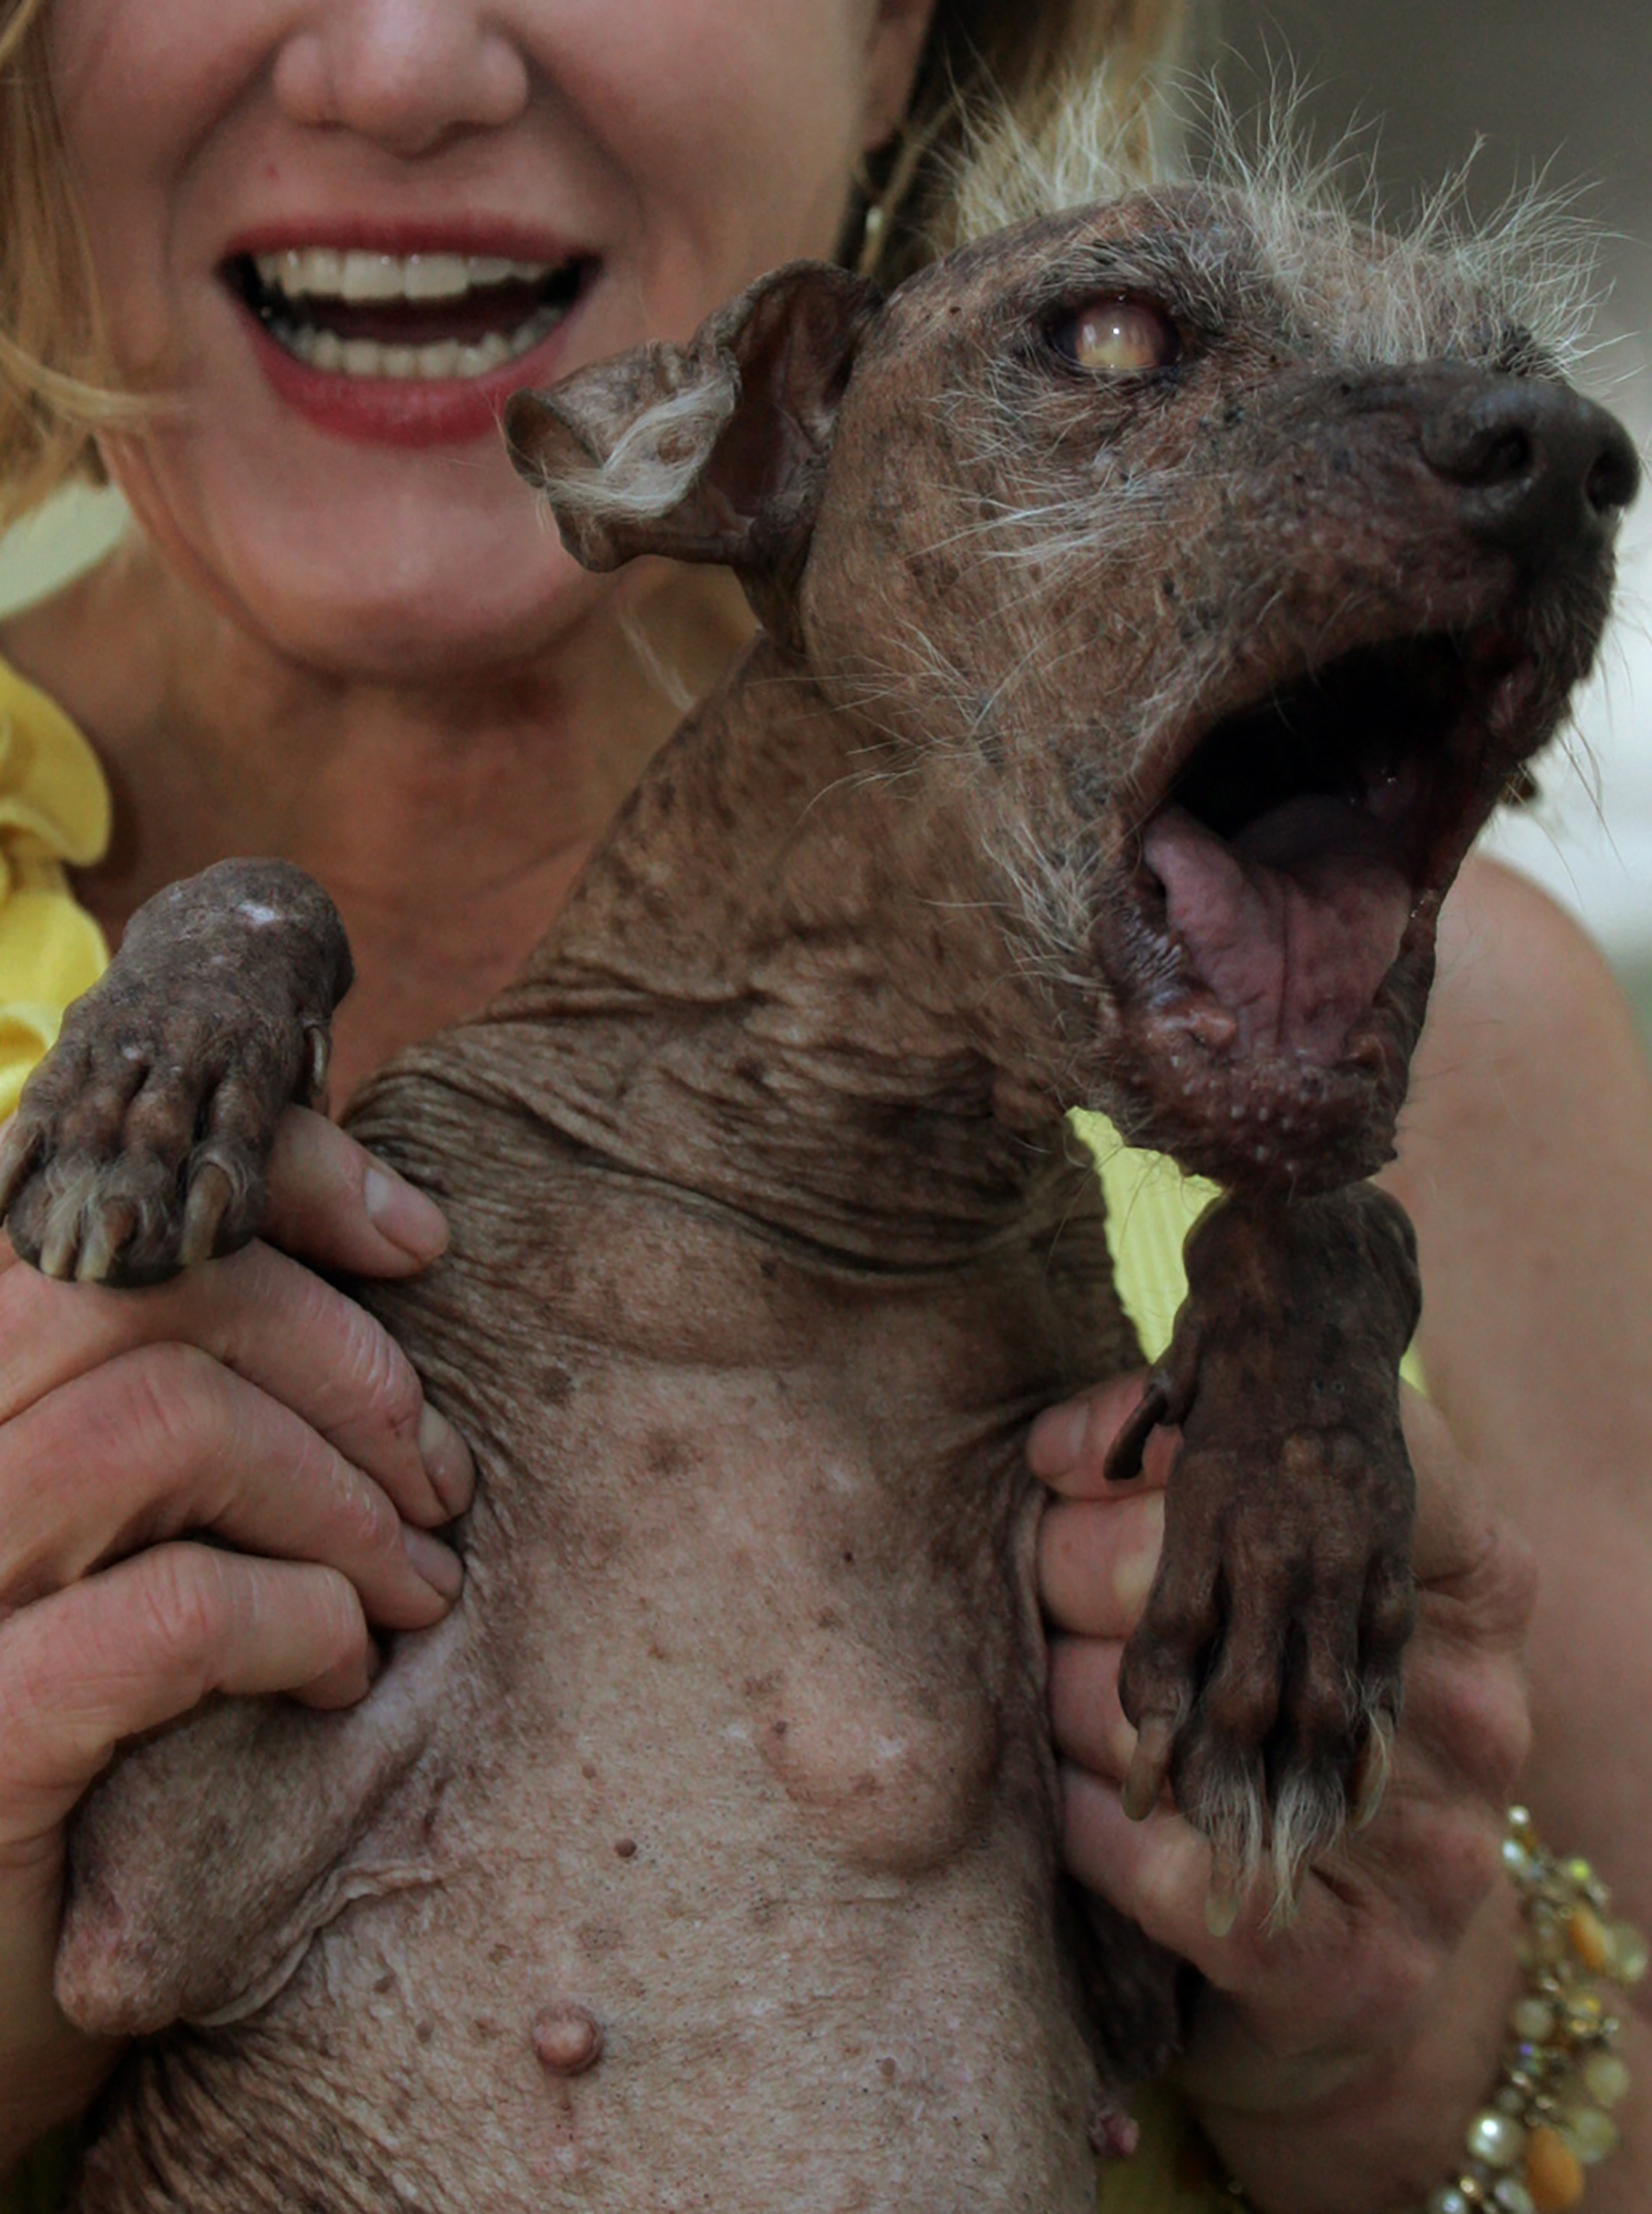 Sam, a 14 year old Pure Chinese Crested Hairless dog, carries with it the reputation of being the Ugliest Dog.